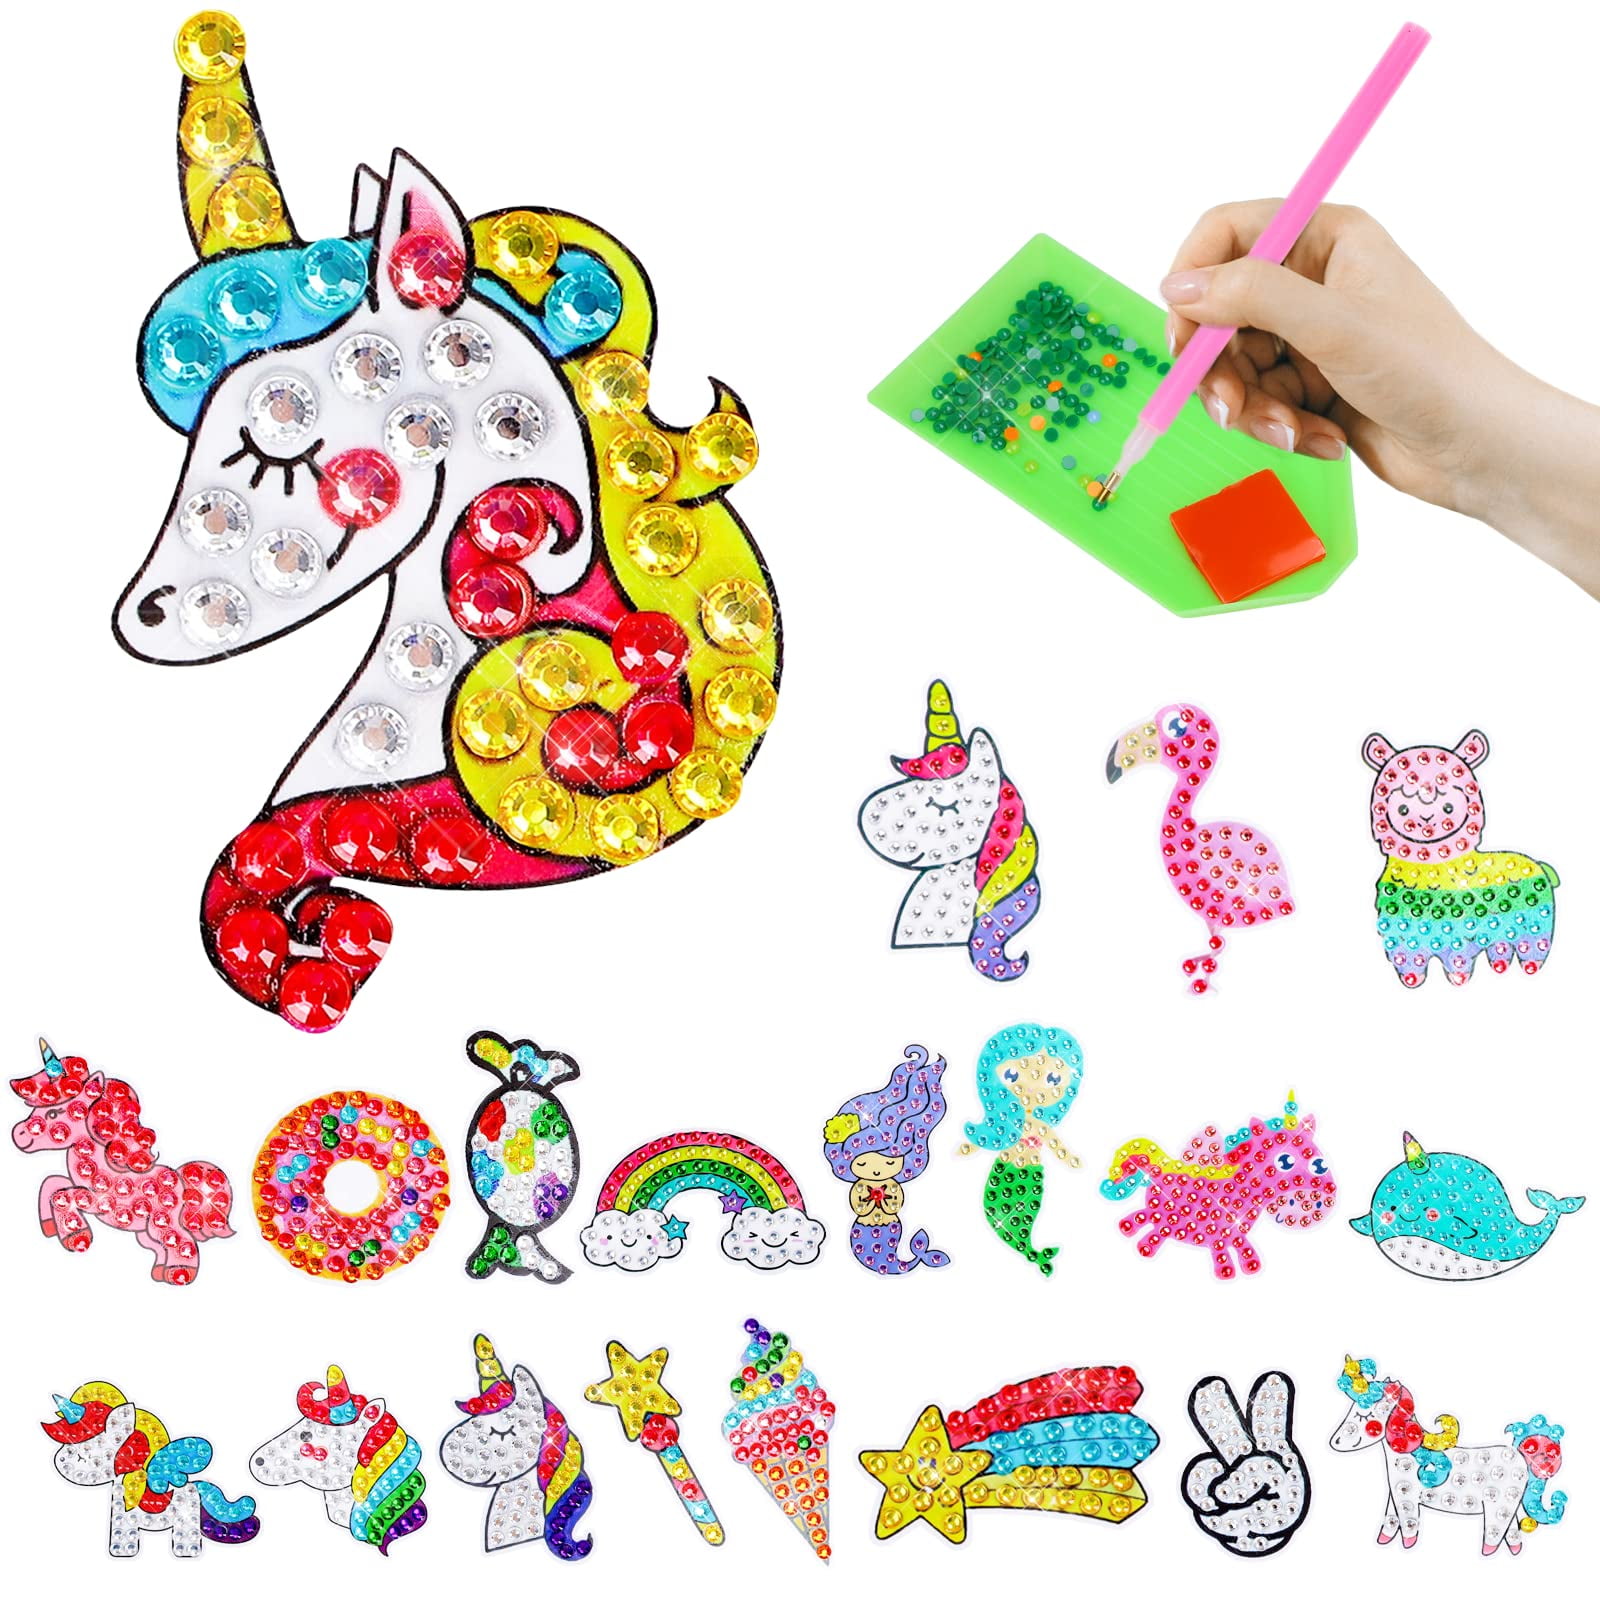 Dream Fun Gift for Kid Girl 8 9 10 11 12 Year Old, Unicorn Craft Toys for Teens  Age 4 5 6 7 Kid Birthday Present Art and Craft Night Light Kit